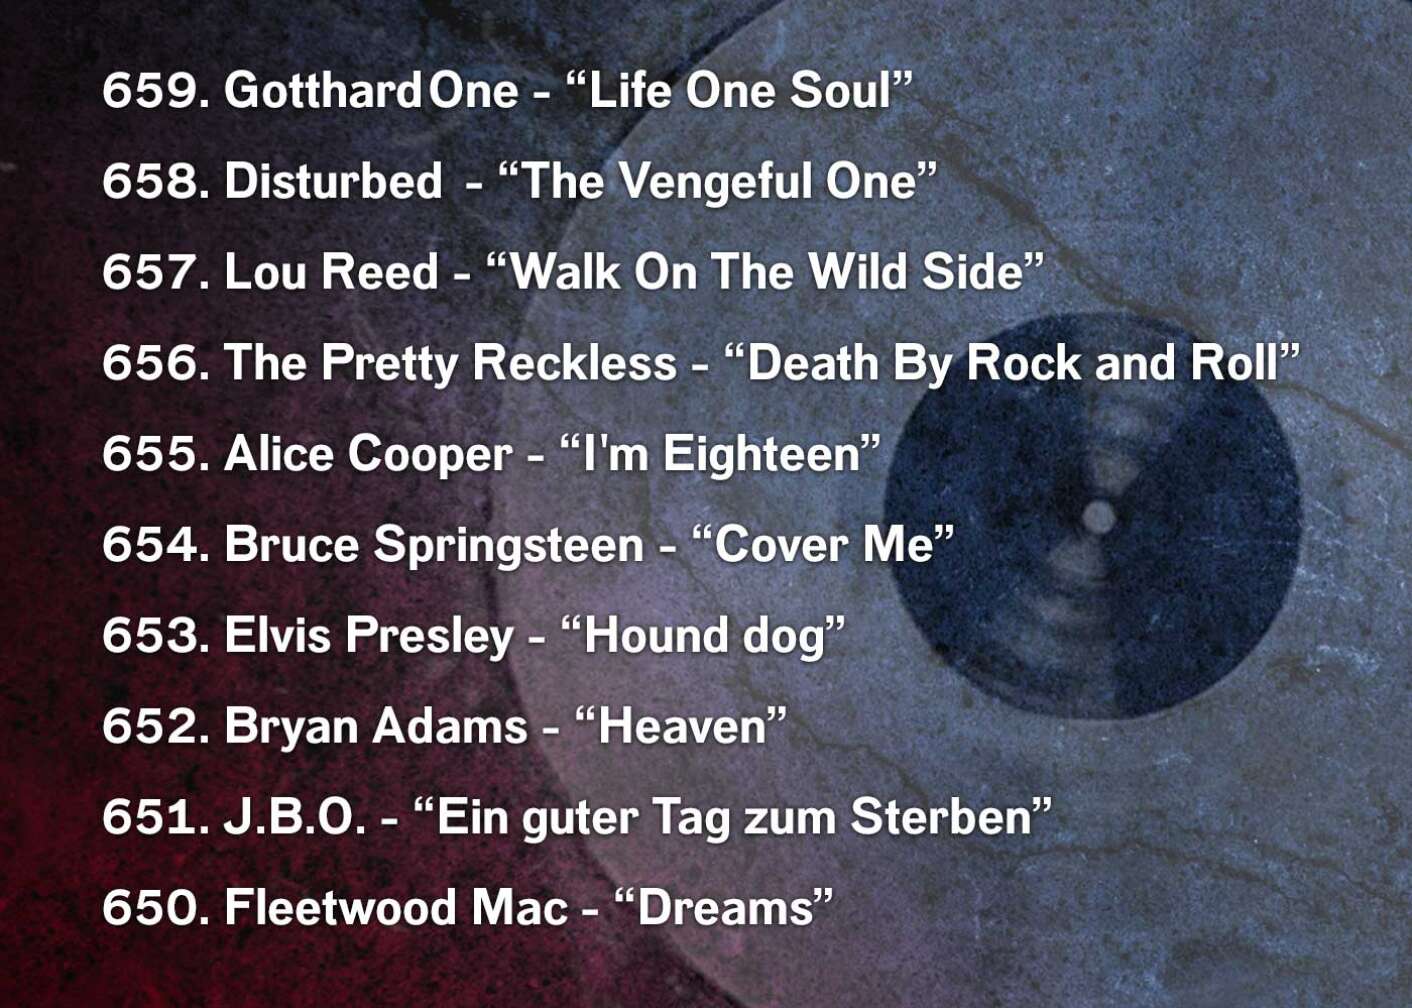 659. Gotthard	One - “Life One Soul” 658. Disturbed	- “The Vengeful One” 657. Lou Reed - “Walk On The Wild Side” 656. The Pretty Reckless - “Death By Rock and Roll” 655. Alice Cooper - “I'm Eighteen” 654. Bruce Springsteen	 - “Cover Me” 653. Elvis Presley - “Hound dog” 652. Bryan Adams - “Heaven” 651. J.B.O. - “Ein guter Tag zum Sterben”  650. Fleetwood Mac - “Dreams”